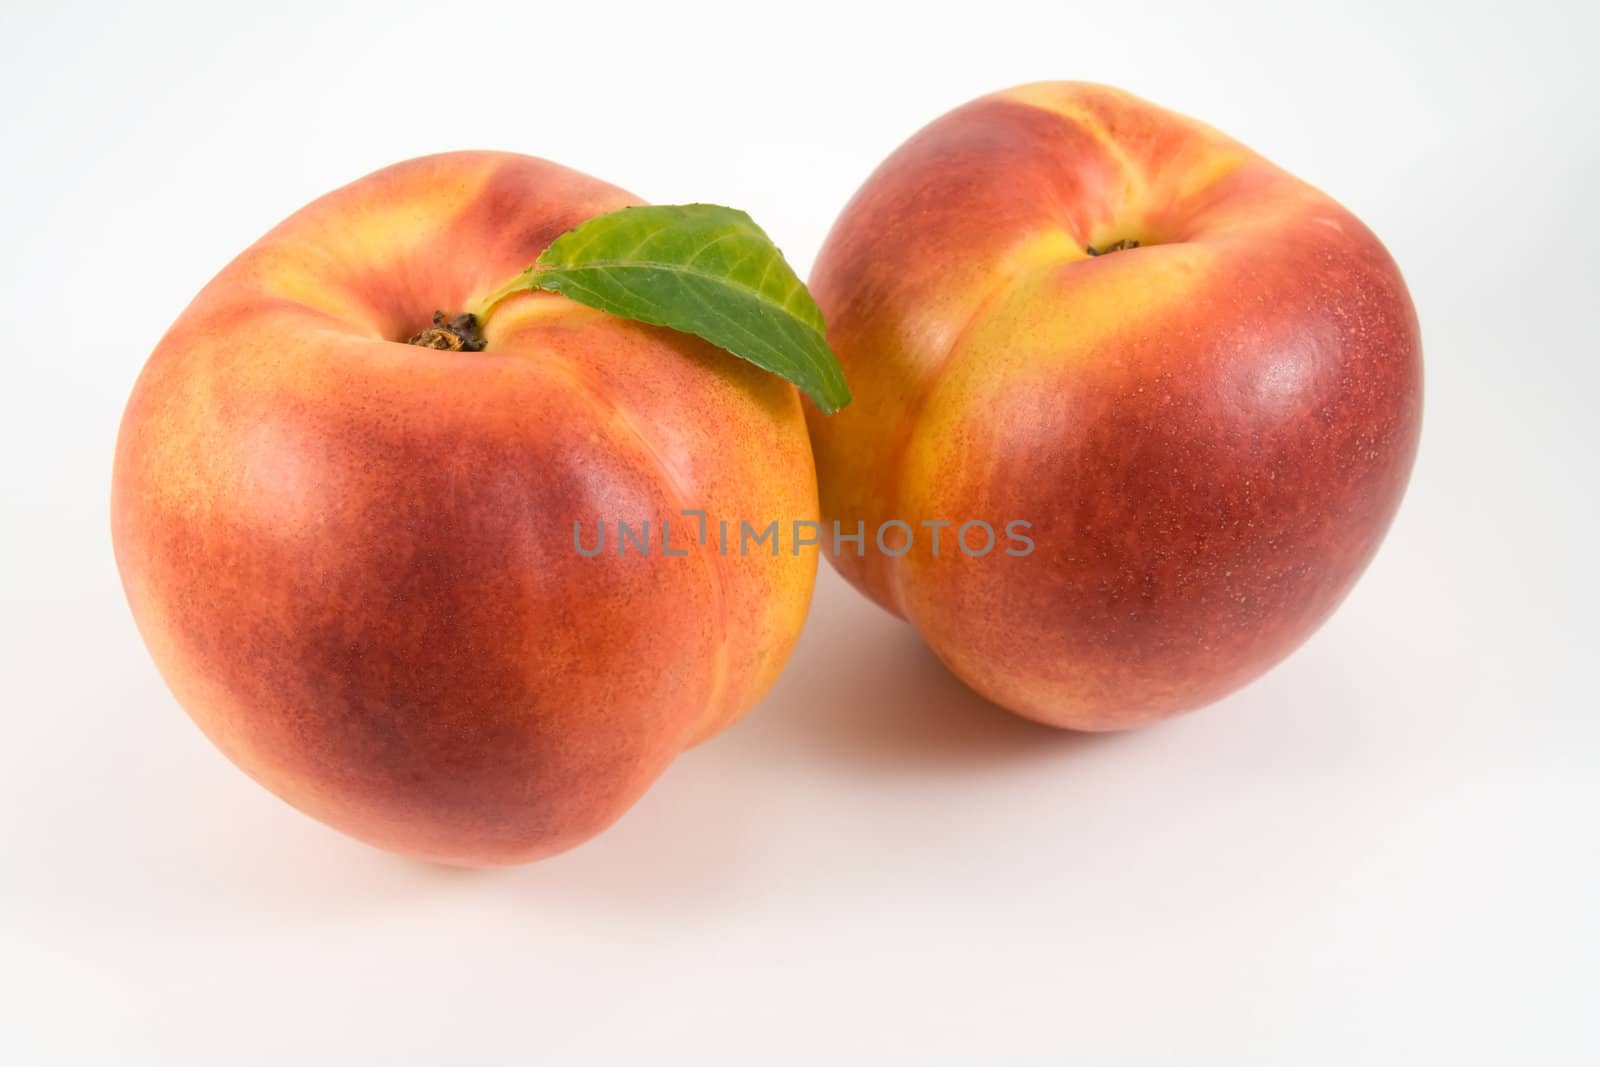 Two ripe nectarines by serpl